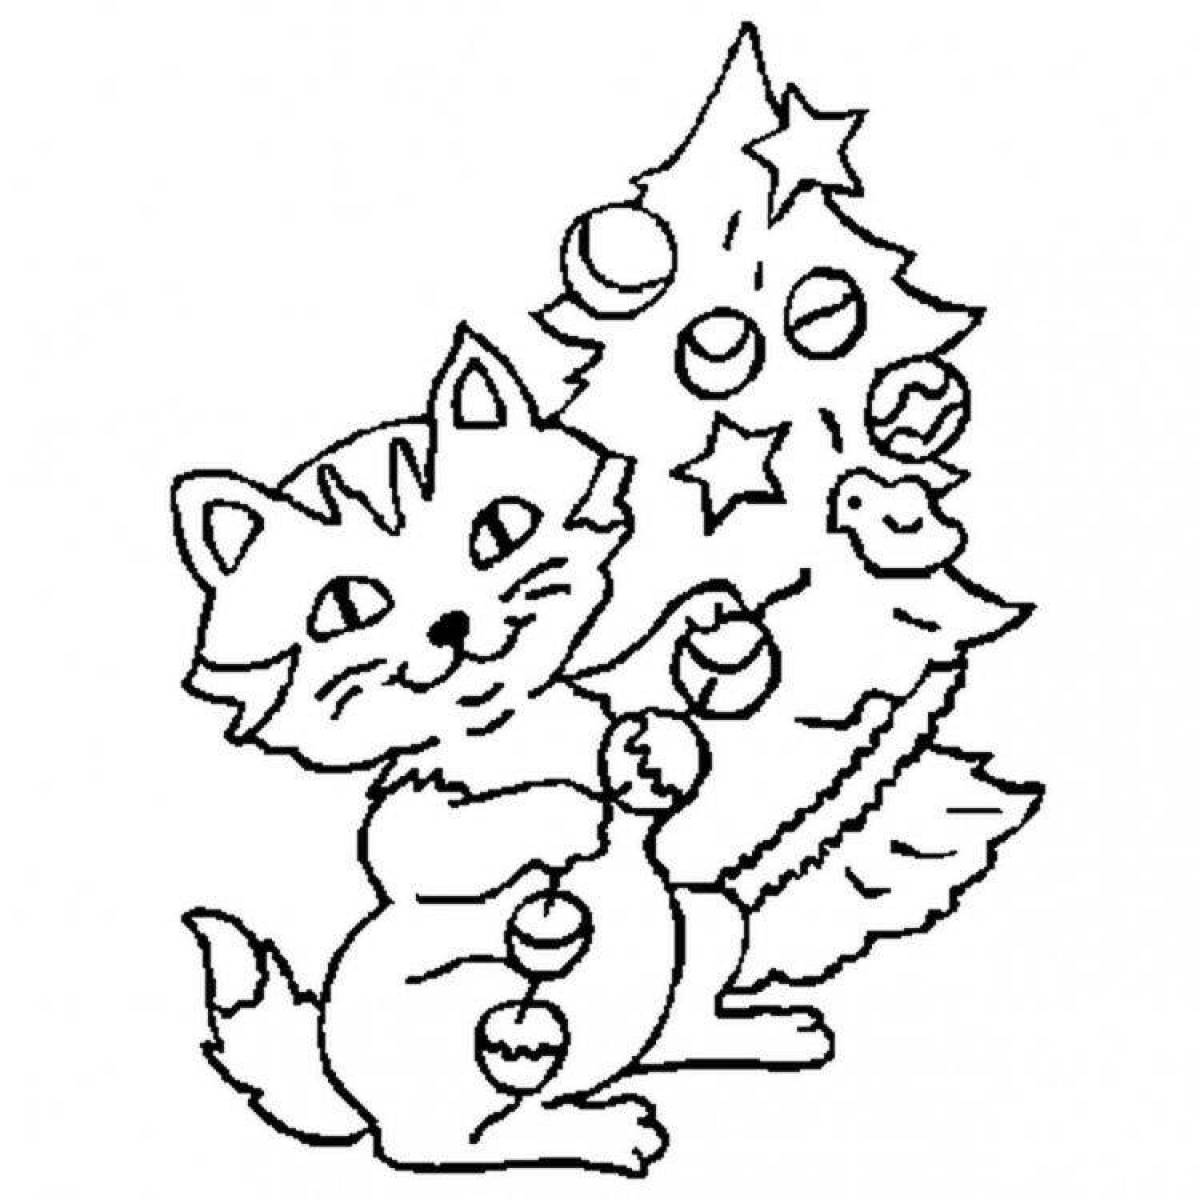 Coloring book fluffy Christmas cat